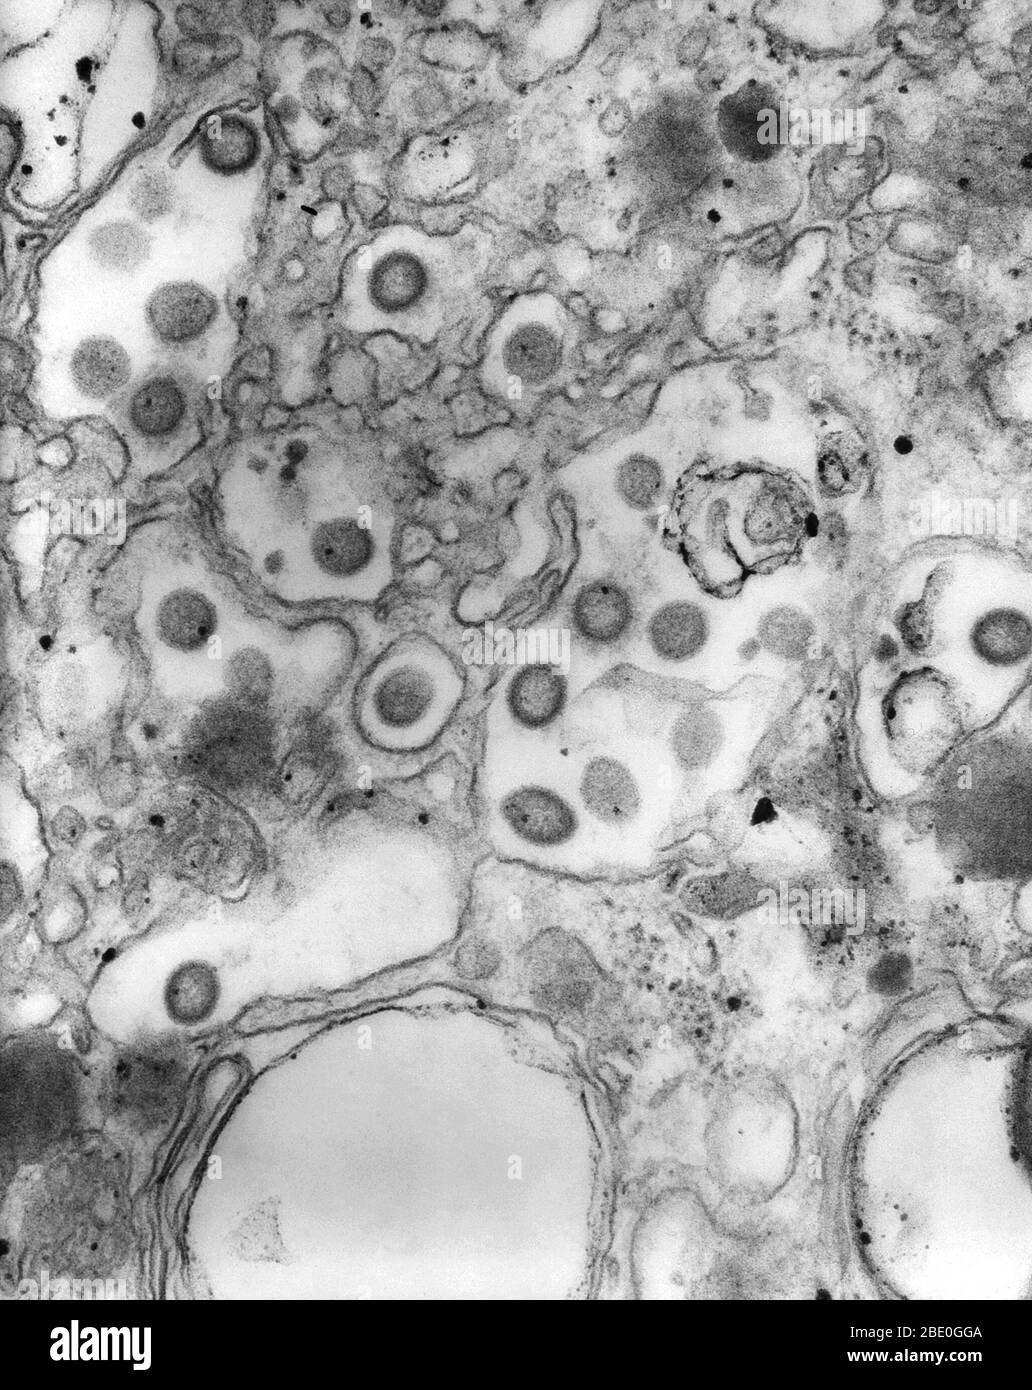 Negatively-stained transmission electron micrograph (TEM) of numerous Ganjam virus virions in tissue specimen. This Bunyaviridae family member is antigenically, closely related to, and an Asian variant of, the Nairobi sheep disease virus (NSDV). Though not contagious, Ganjam virus is an arbovirus, spread through the bite of certain ticks, including Hemaphysalis intermedia and Rhipecephalus hemaphysaloides. The largest family of viruses, Bunyaviridae are negative-sense single-stranded RNA viruses ((-) ssRNA), which are spread through contact with infected arthropods and rodents. Stock Photo